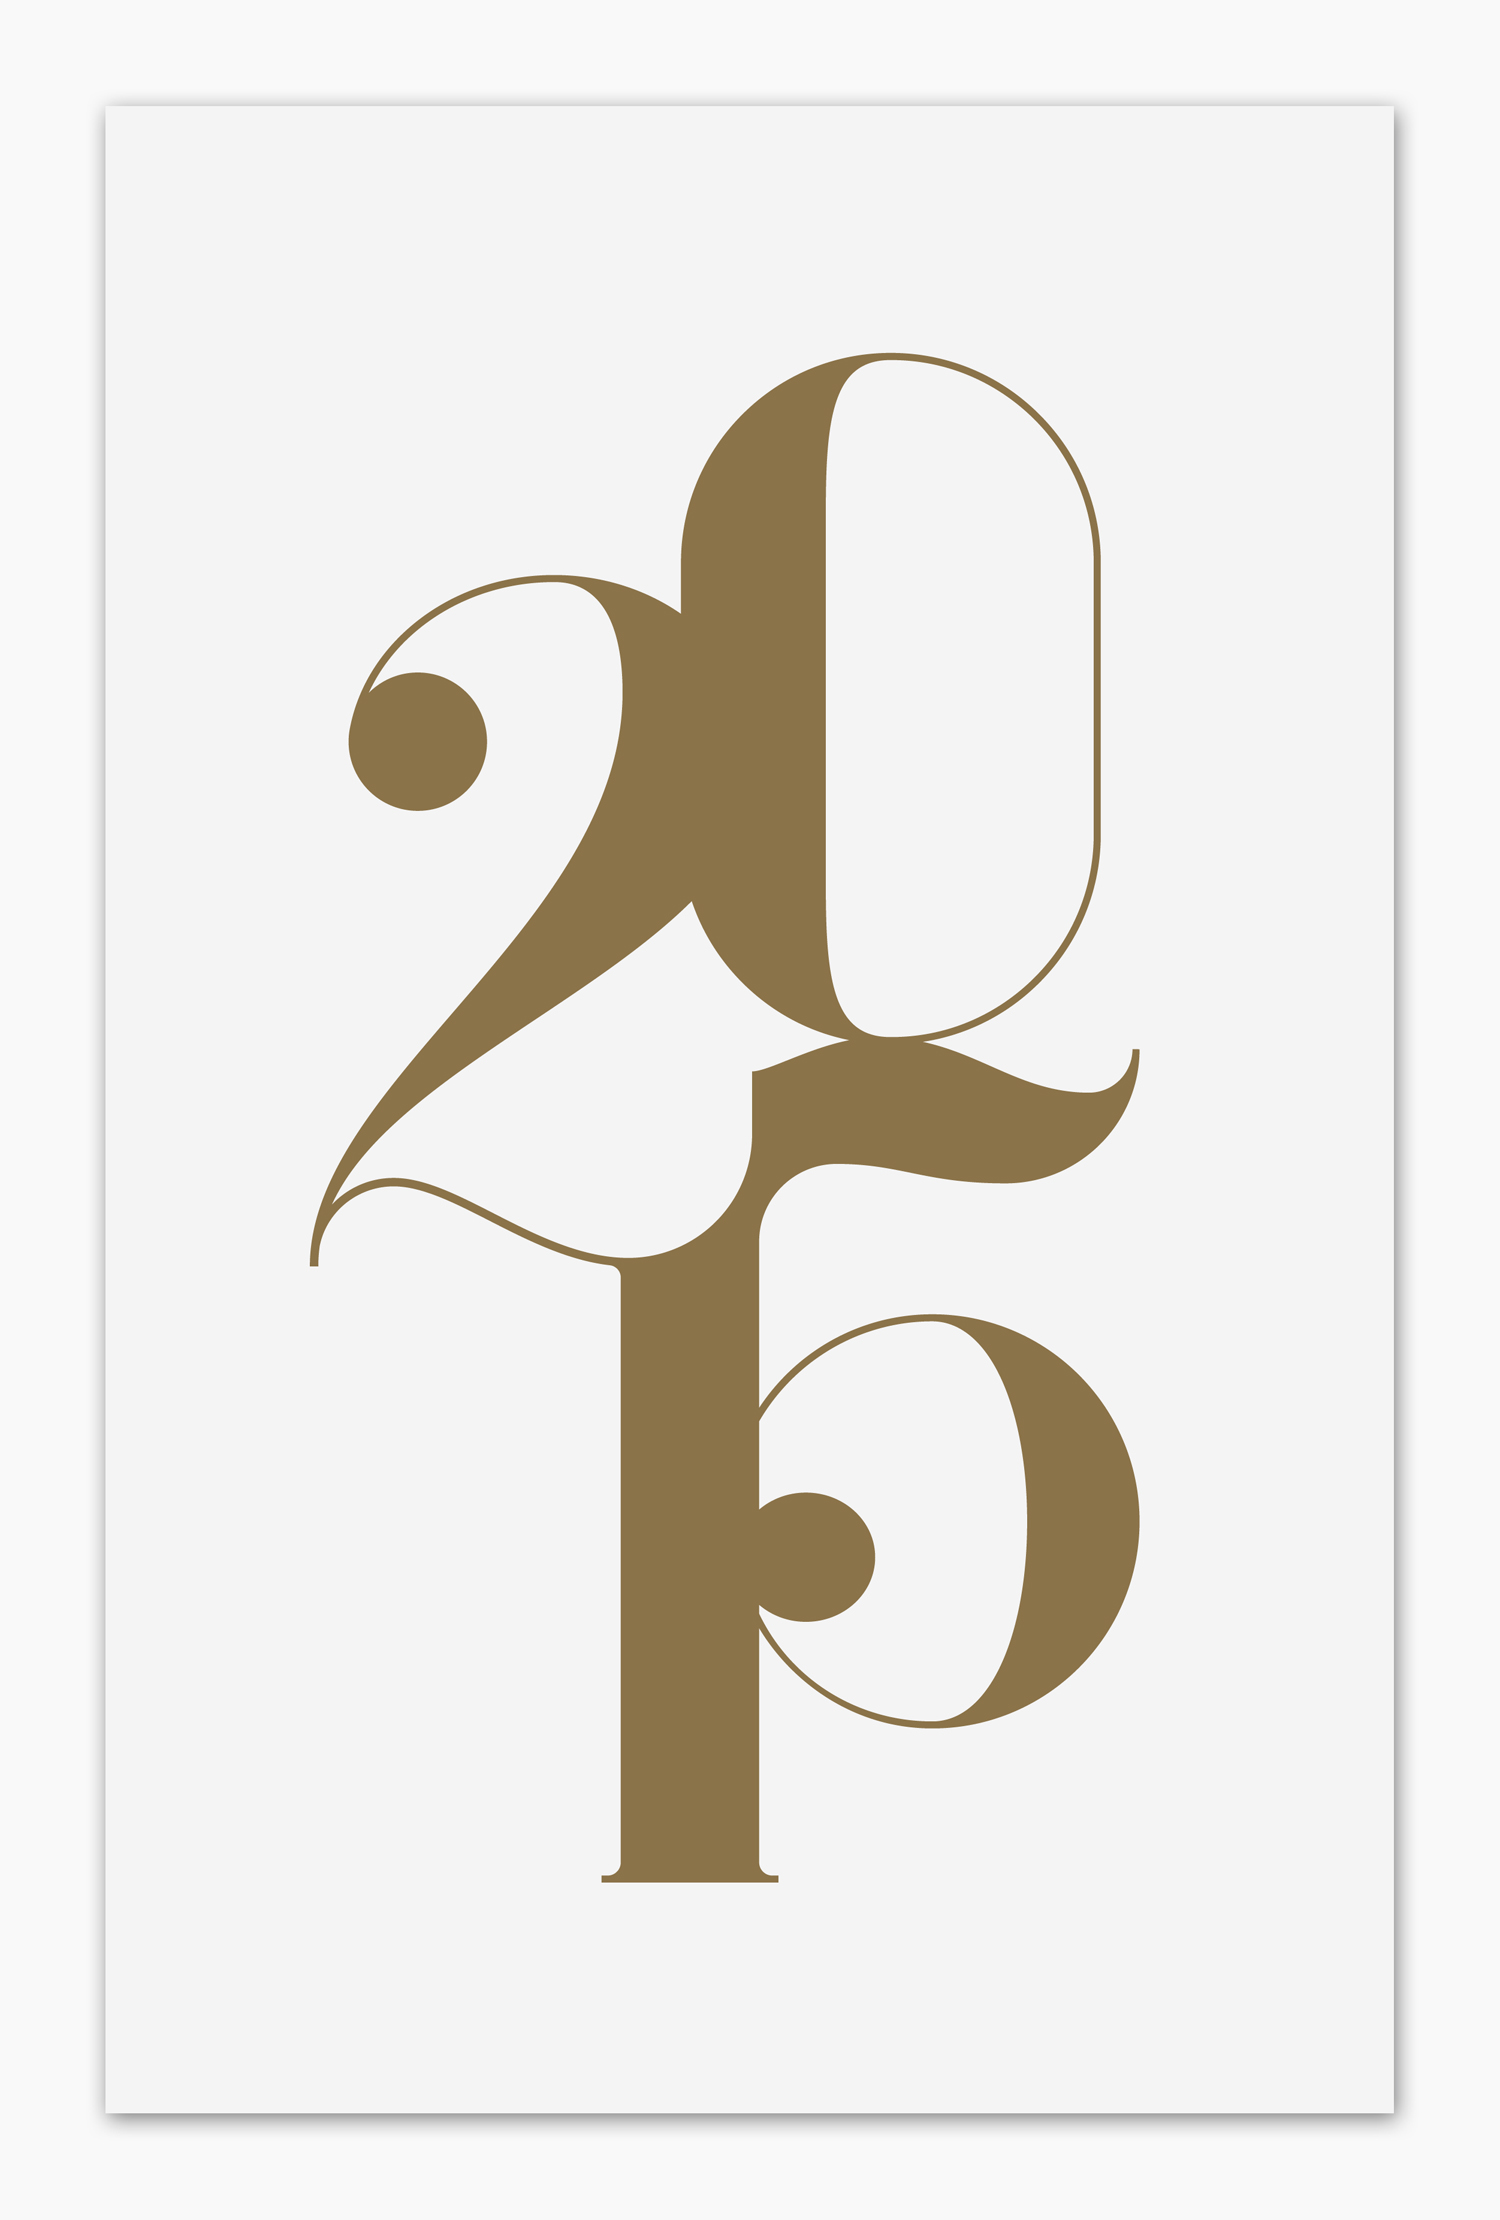 Vertical gold font with numbers.